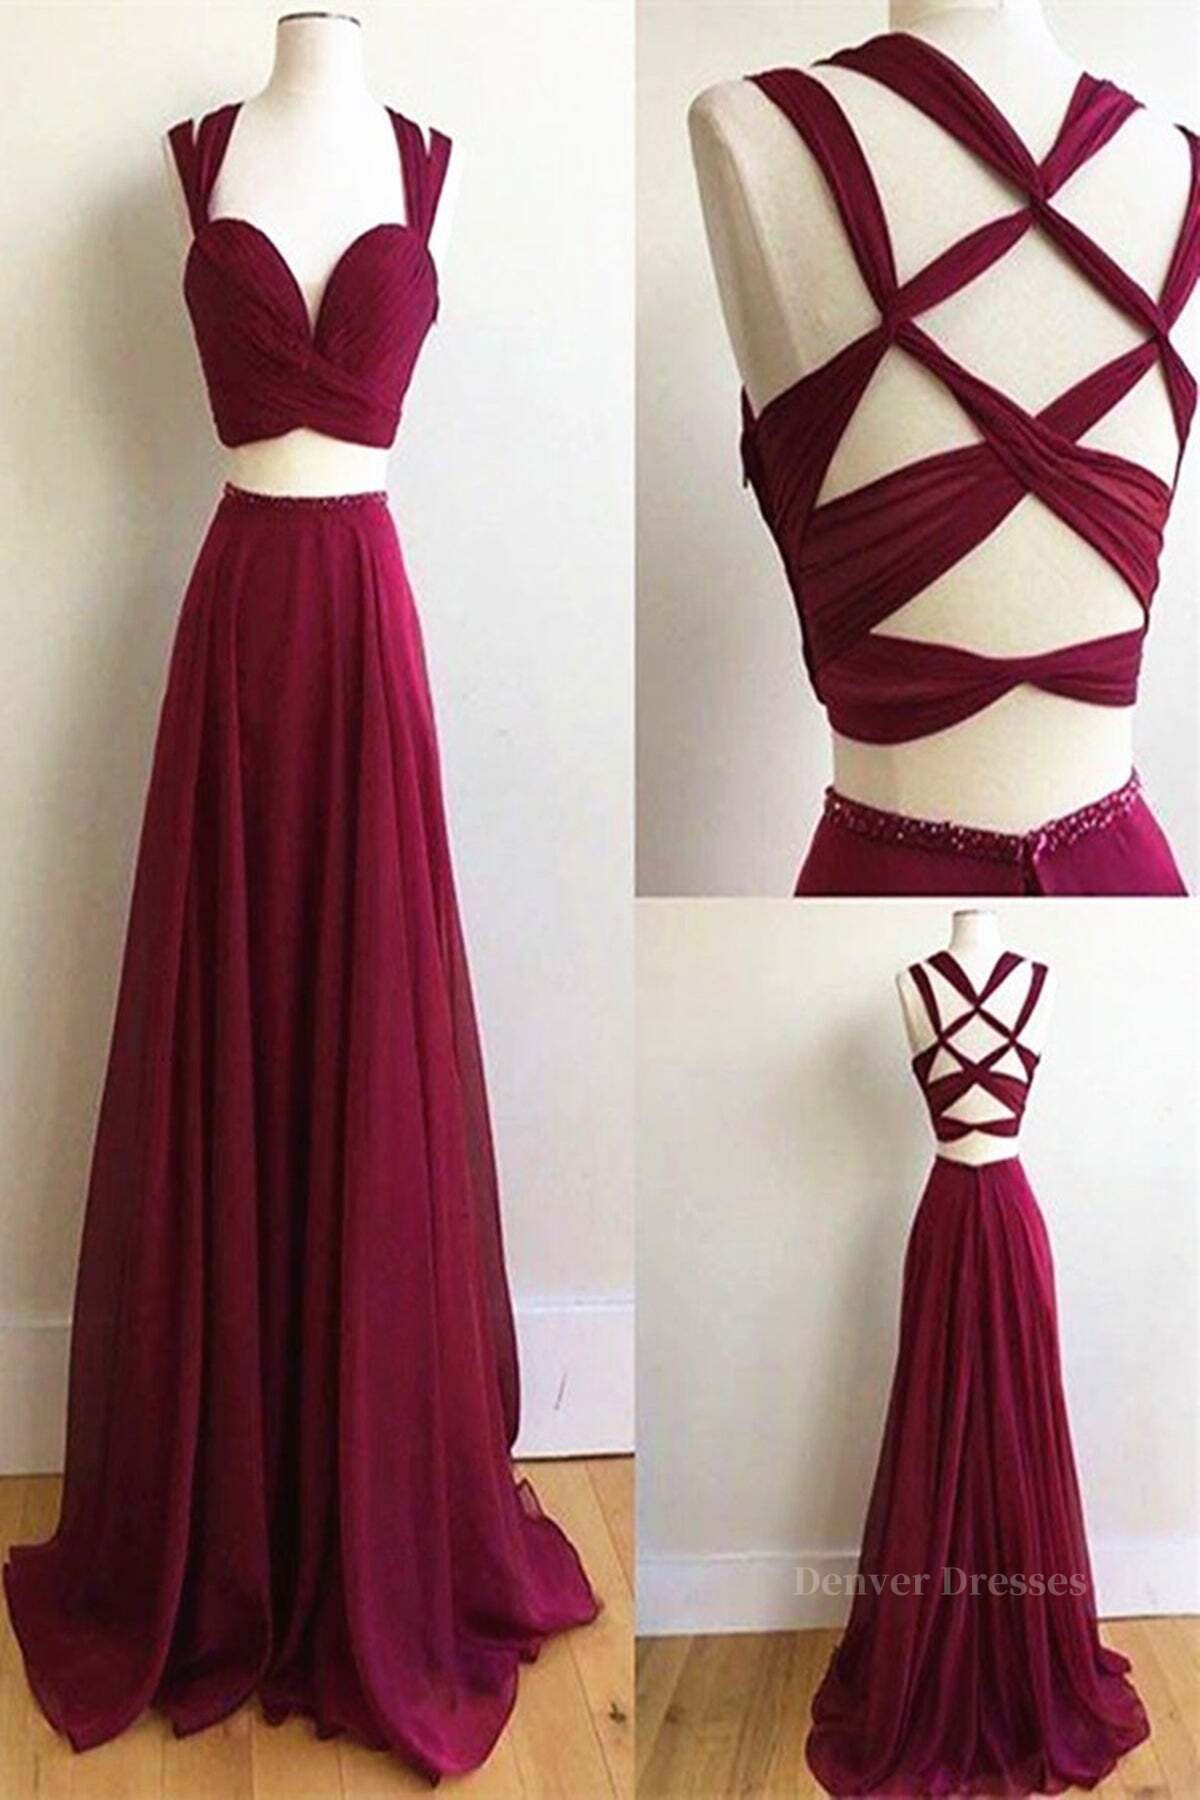 Evening Dresses 31, Two Pieces Burgundy Chiffon Long Prom Dresses, 2 Pieces Wine Red Long Formal Evening Dresses